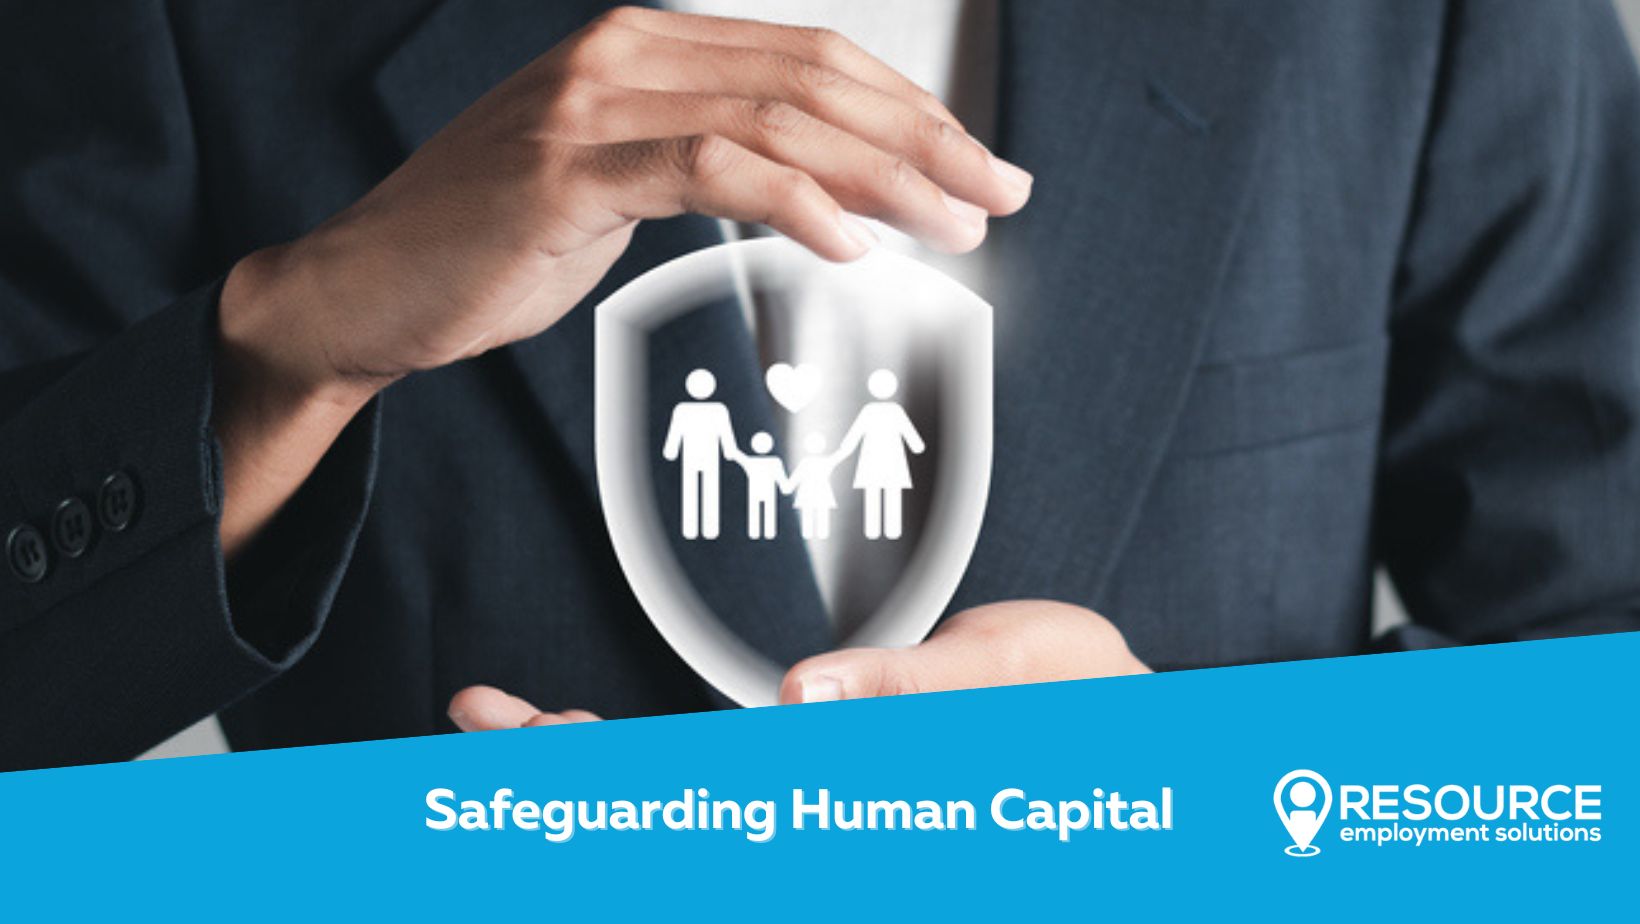 Safeguarding Human Capital: Prioritizing Protection with Resource Employment Solutions